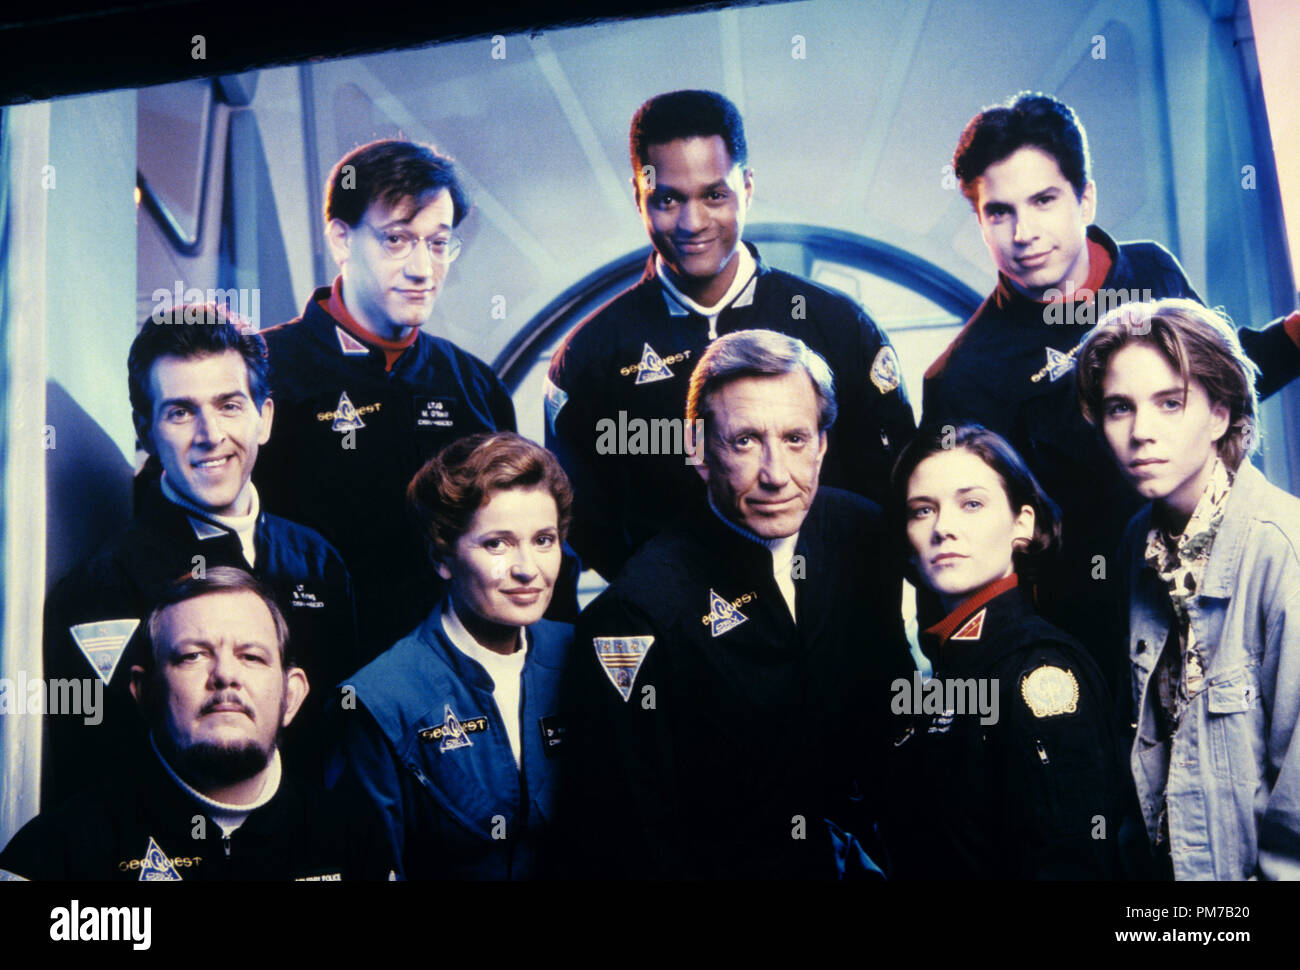 Film Still from 'SeaQuest DSV' Royce D. Applegate, Ted Raimi, Don Franklin, Stephanie Beacham, Roy Scheider, Stacy Haiduk, Marco Sanchez, Jonathan Brandis circa 1995   File Reference # 31043127THA  For Editorial Use Only - All Rights Reserved Stock Photo